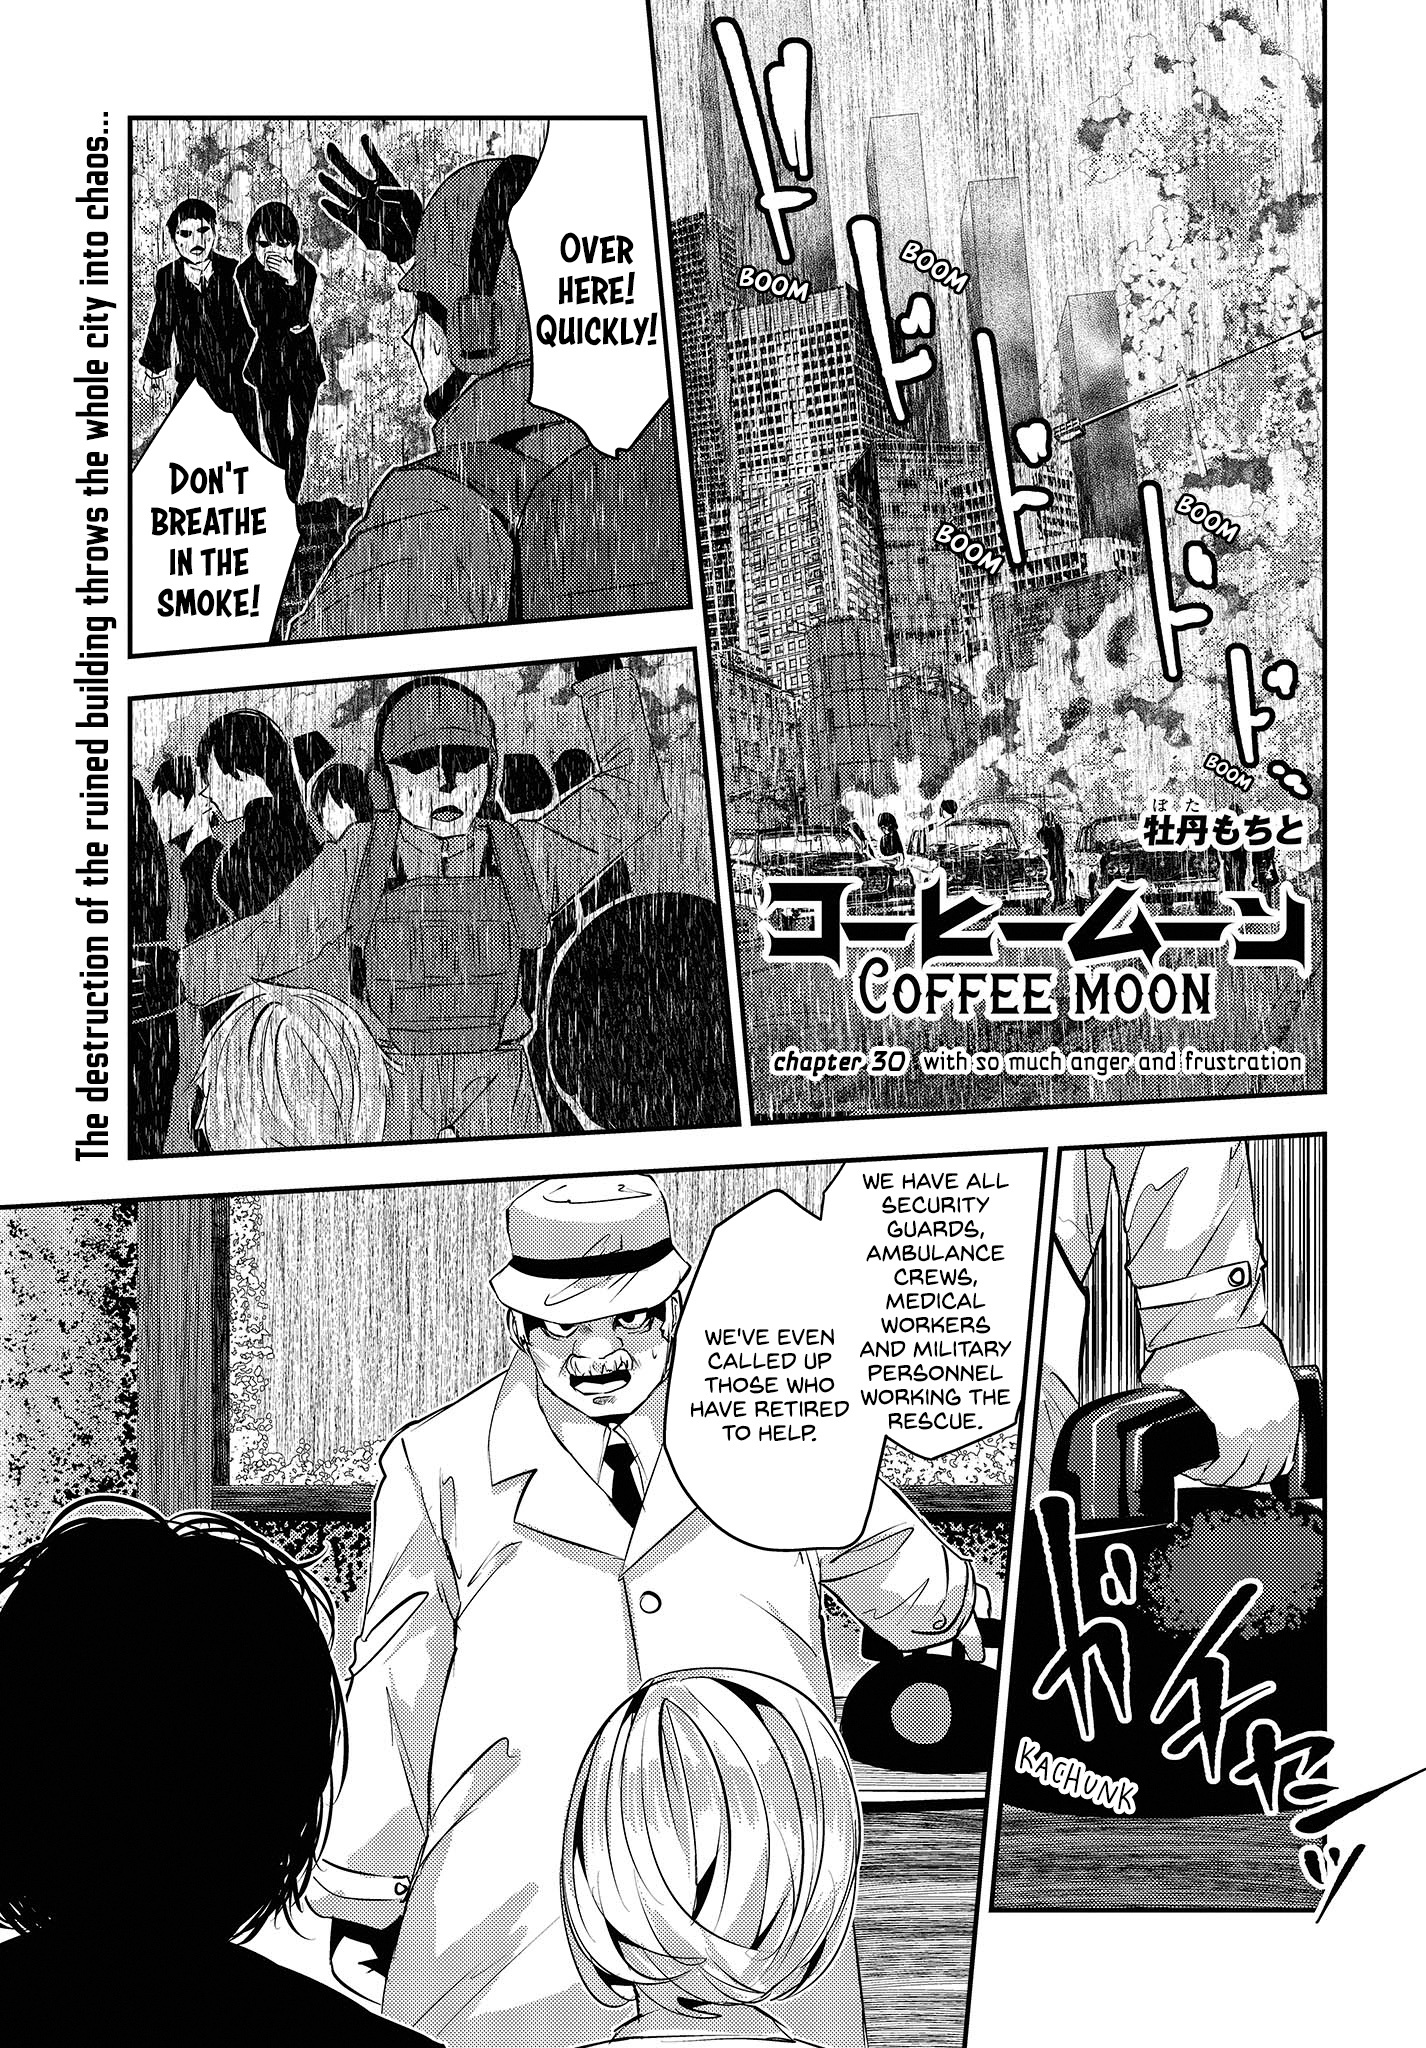 Coffee Moon Chapter 30: With So Much Anger And Frustration - Picture 1